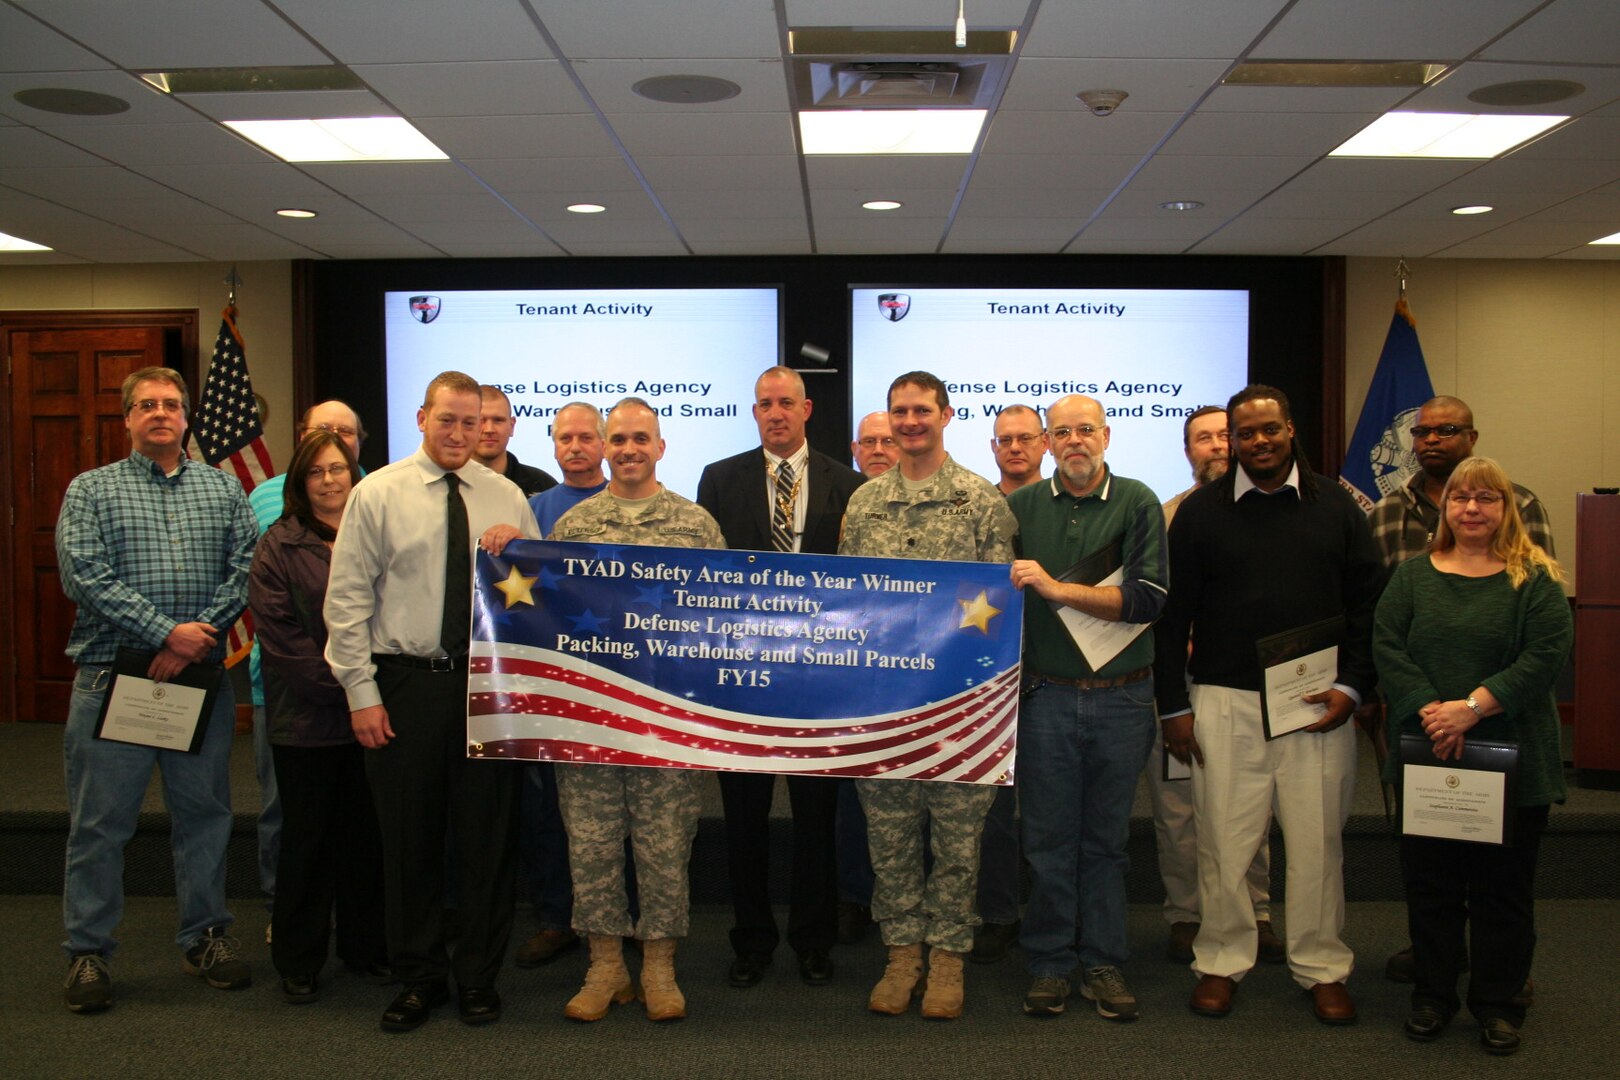 Army Col. Gregory Peterson, front row, second from left, presents the TYAD Safety Area of the Year – Tenant Activity award to the Packing, Warehouse and Small Parcel area of Defense Logistics Agency Distribution Tobyhanna, Pa.  Pictured are (front row, left to right) Steavon Allen, Peterson, Robert Dodson (deputy commander of DLA Distribution Tobyhanna), Army Lt. Col. John Turner (commander of DLA Distribution Tobyhanna), Alan Yearing, Quantell Bowman, Stephanie Cammerota. Second row, left to right: Wayne Lasky, Arlene Slinger, Scott Zurat, Carl Stravinski Jr., Frank Mihalich, Kevin Urbanowicz, Tom Kanuik, Dan Gocek and James Dixon.  Absent from photo: John Gerrity, Mike Deganich, Harlan Lynch, and Brian Mullin.